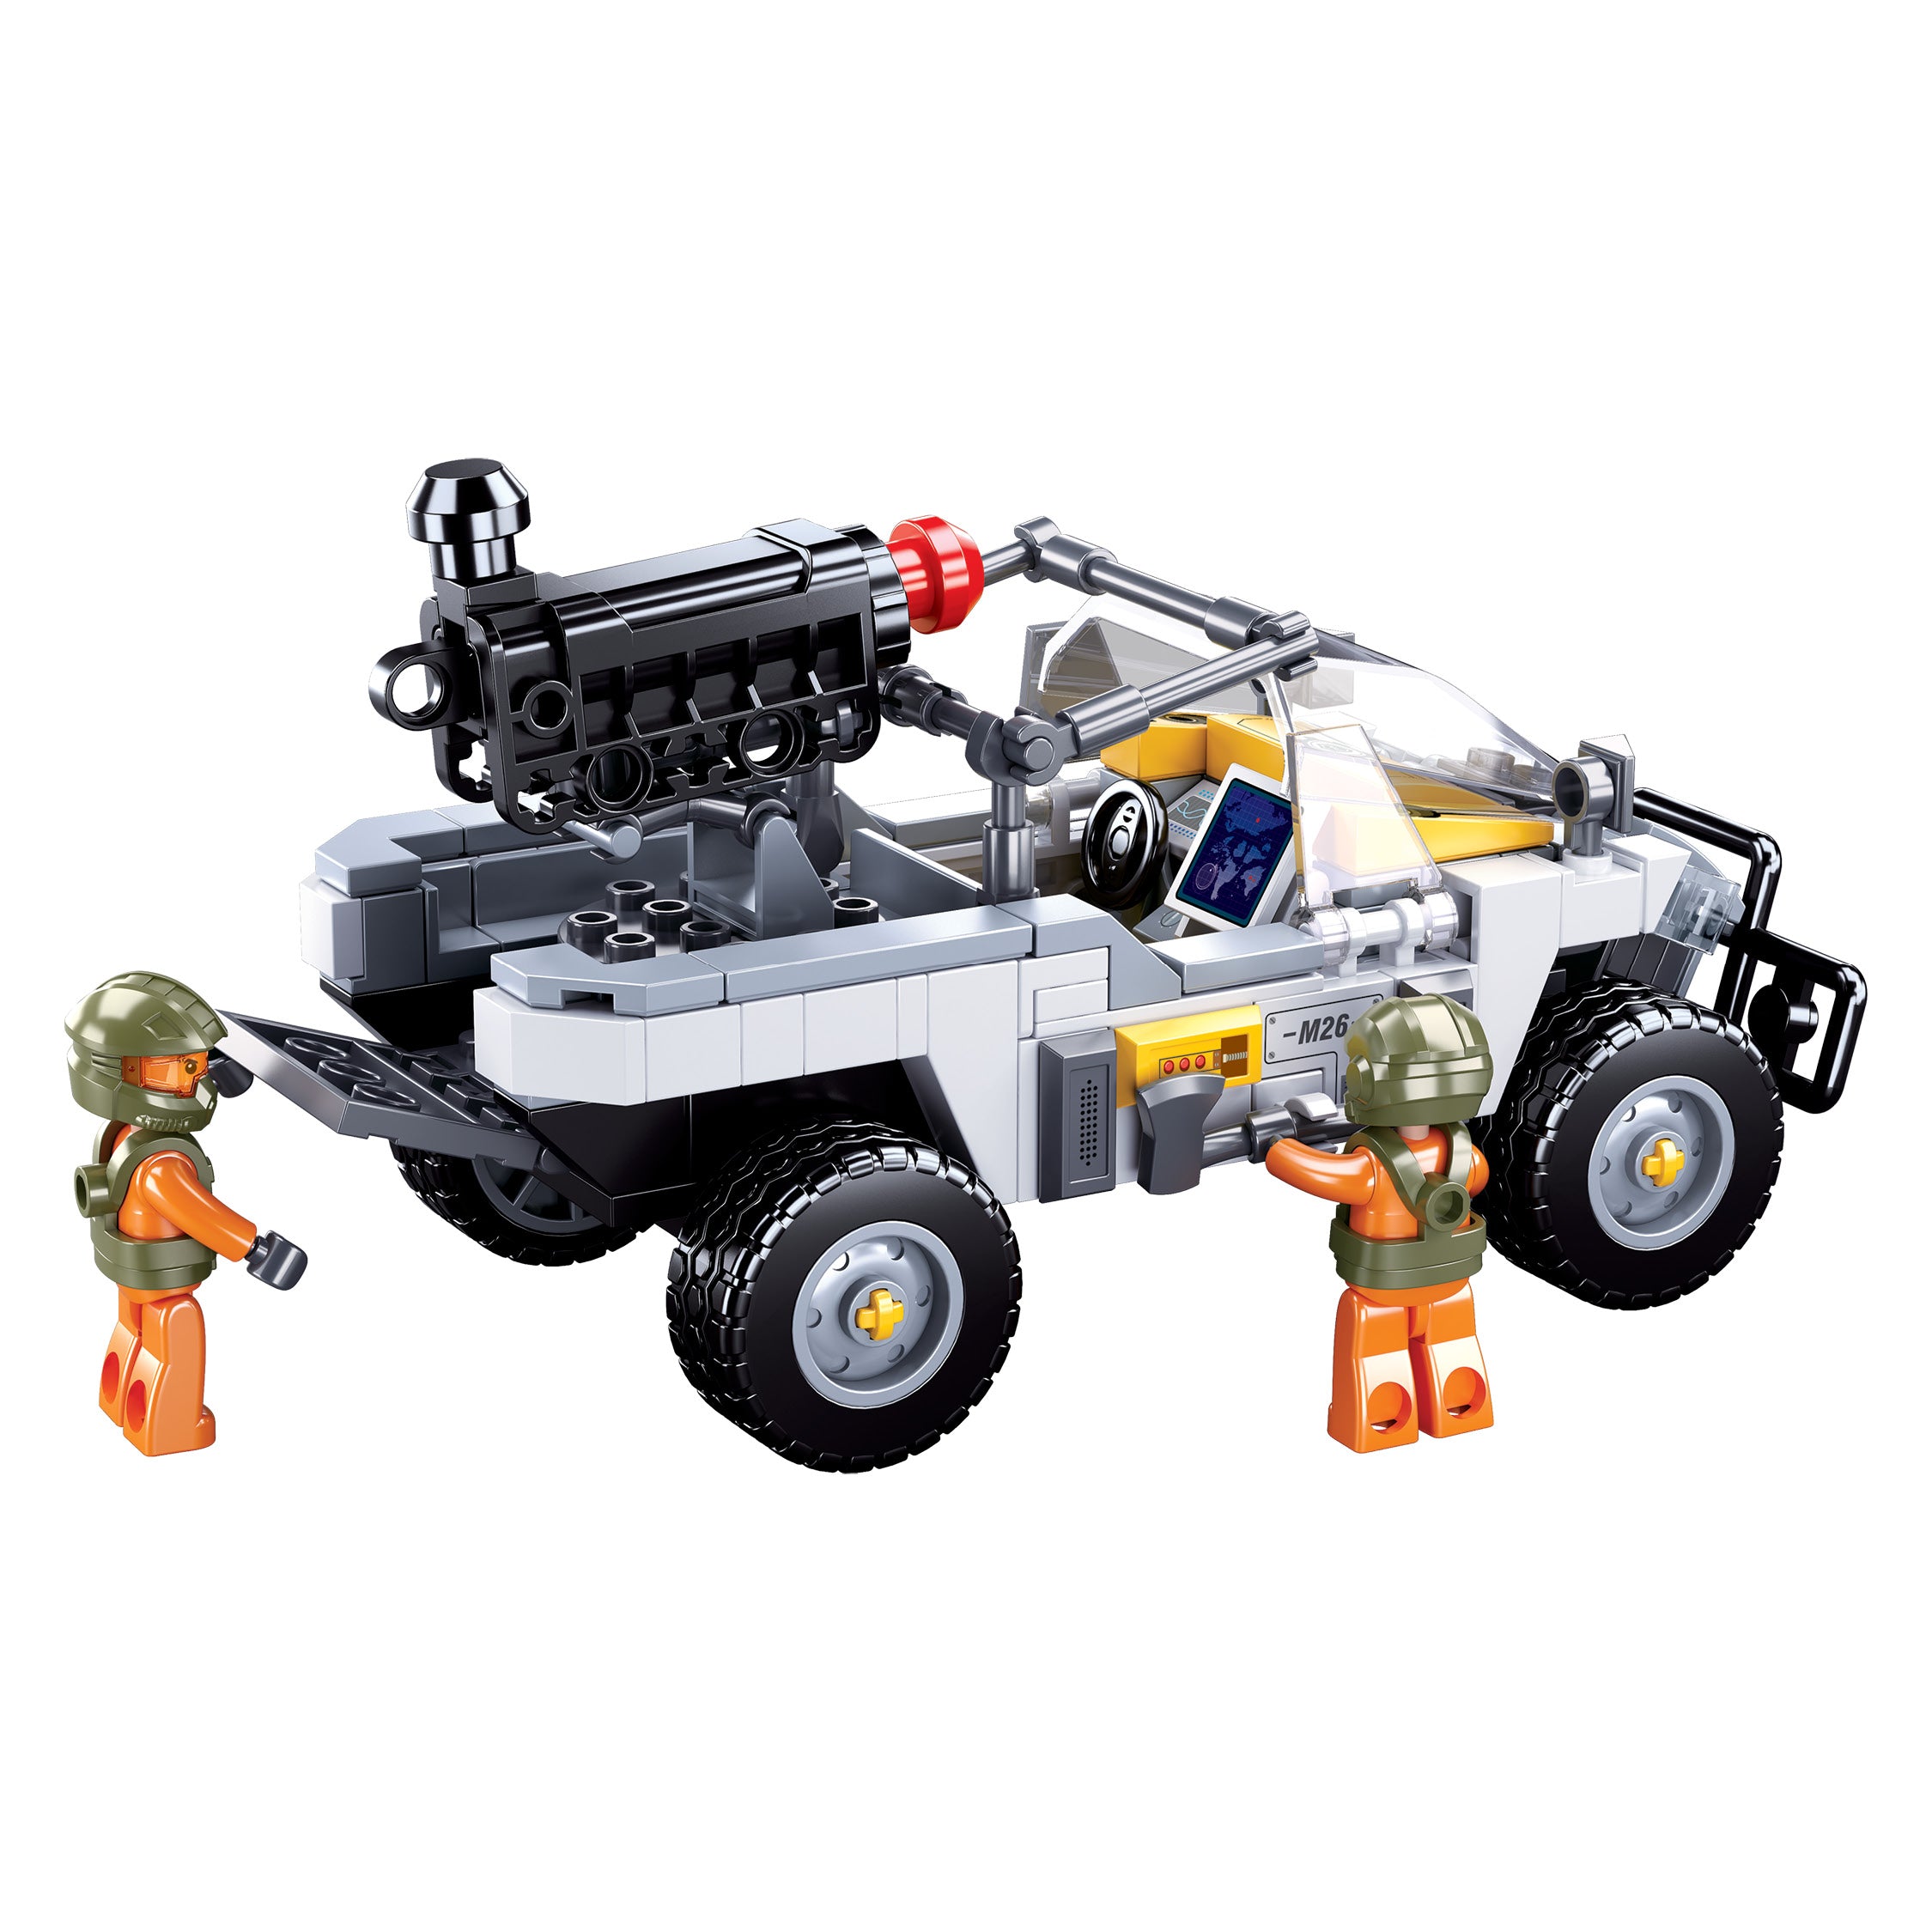 Sluban® Atomic Storm(Fire Rain)-Annihilation Operation (M38-B0995) (300 Pieces) Building Blocks Kit For Boys Aged 6 Years And Above Creative  Construction Set Educational Stem Toy Blocks Compatible With Other Leading Brands, Bis Certified.